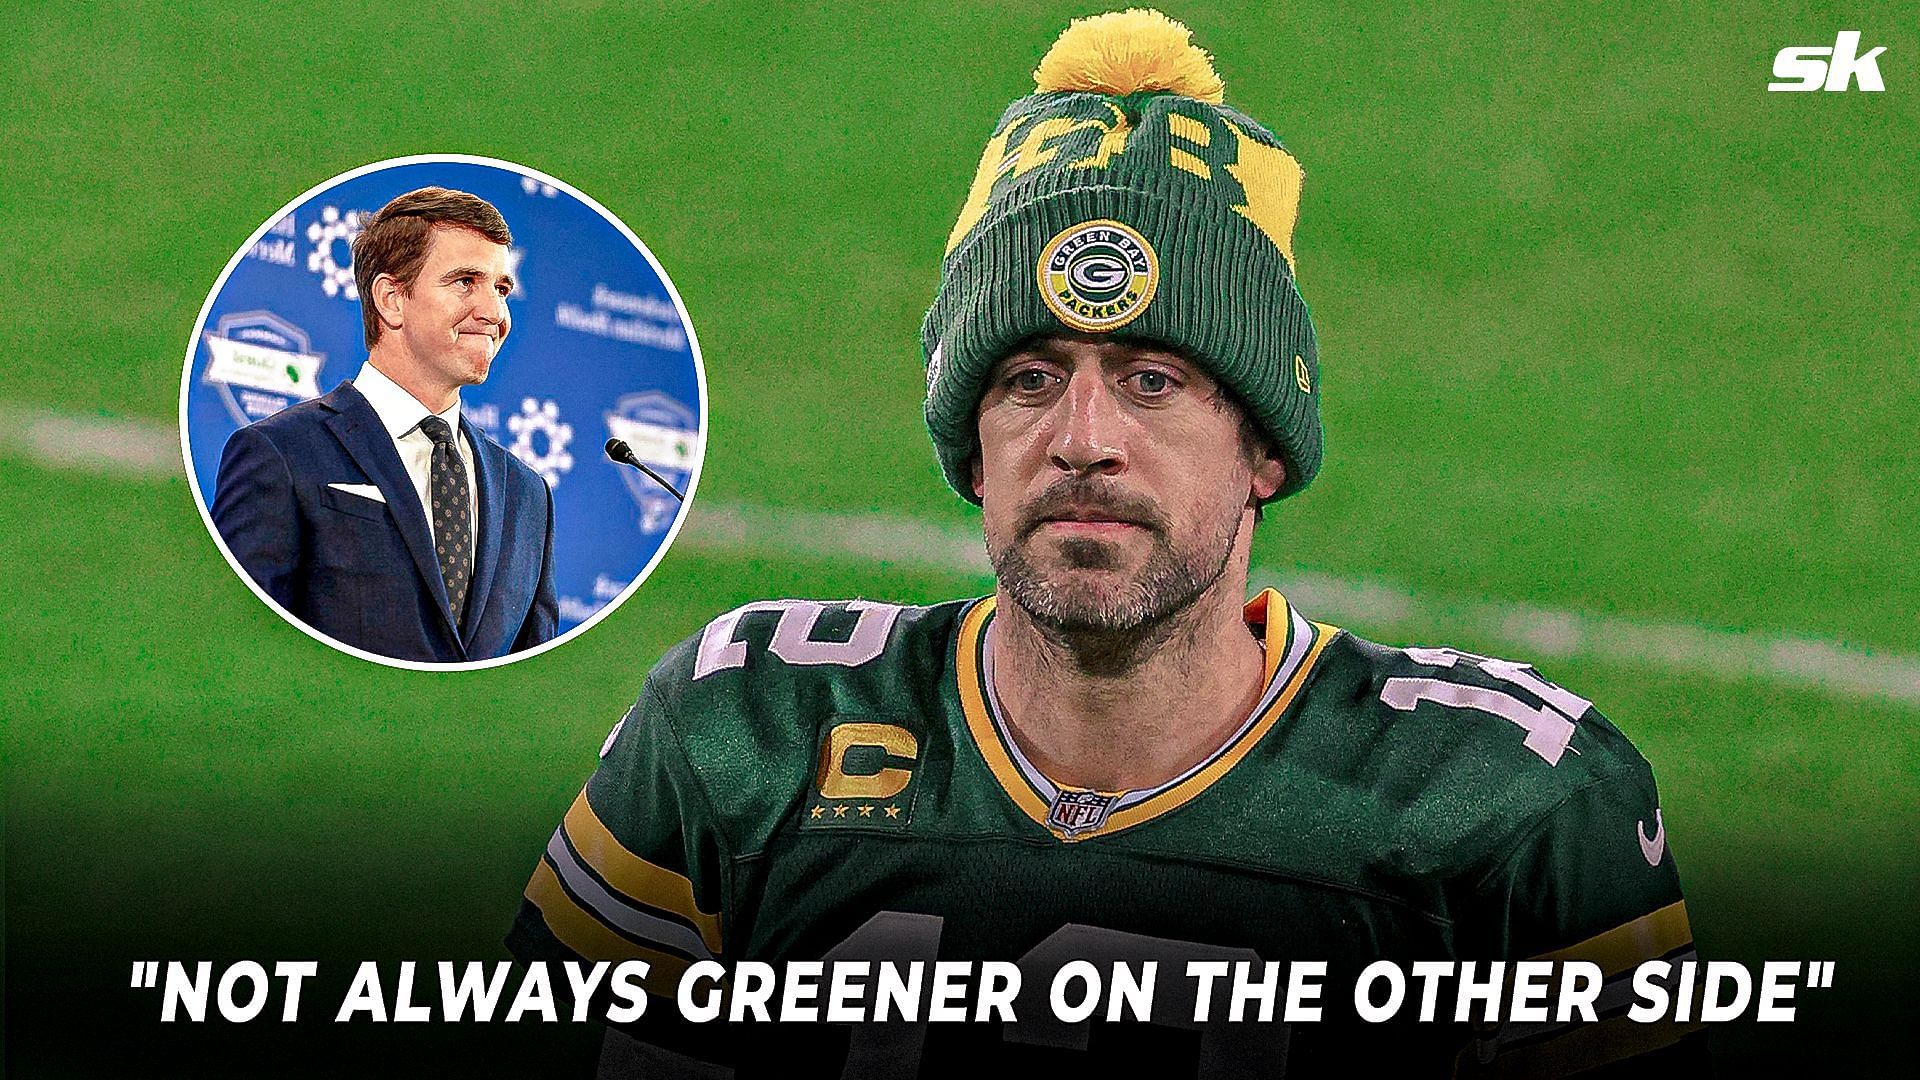 Enter caption Eli Manning&#039;s advice to Aaron Rodgers